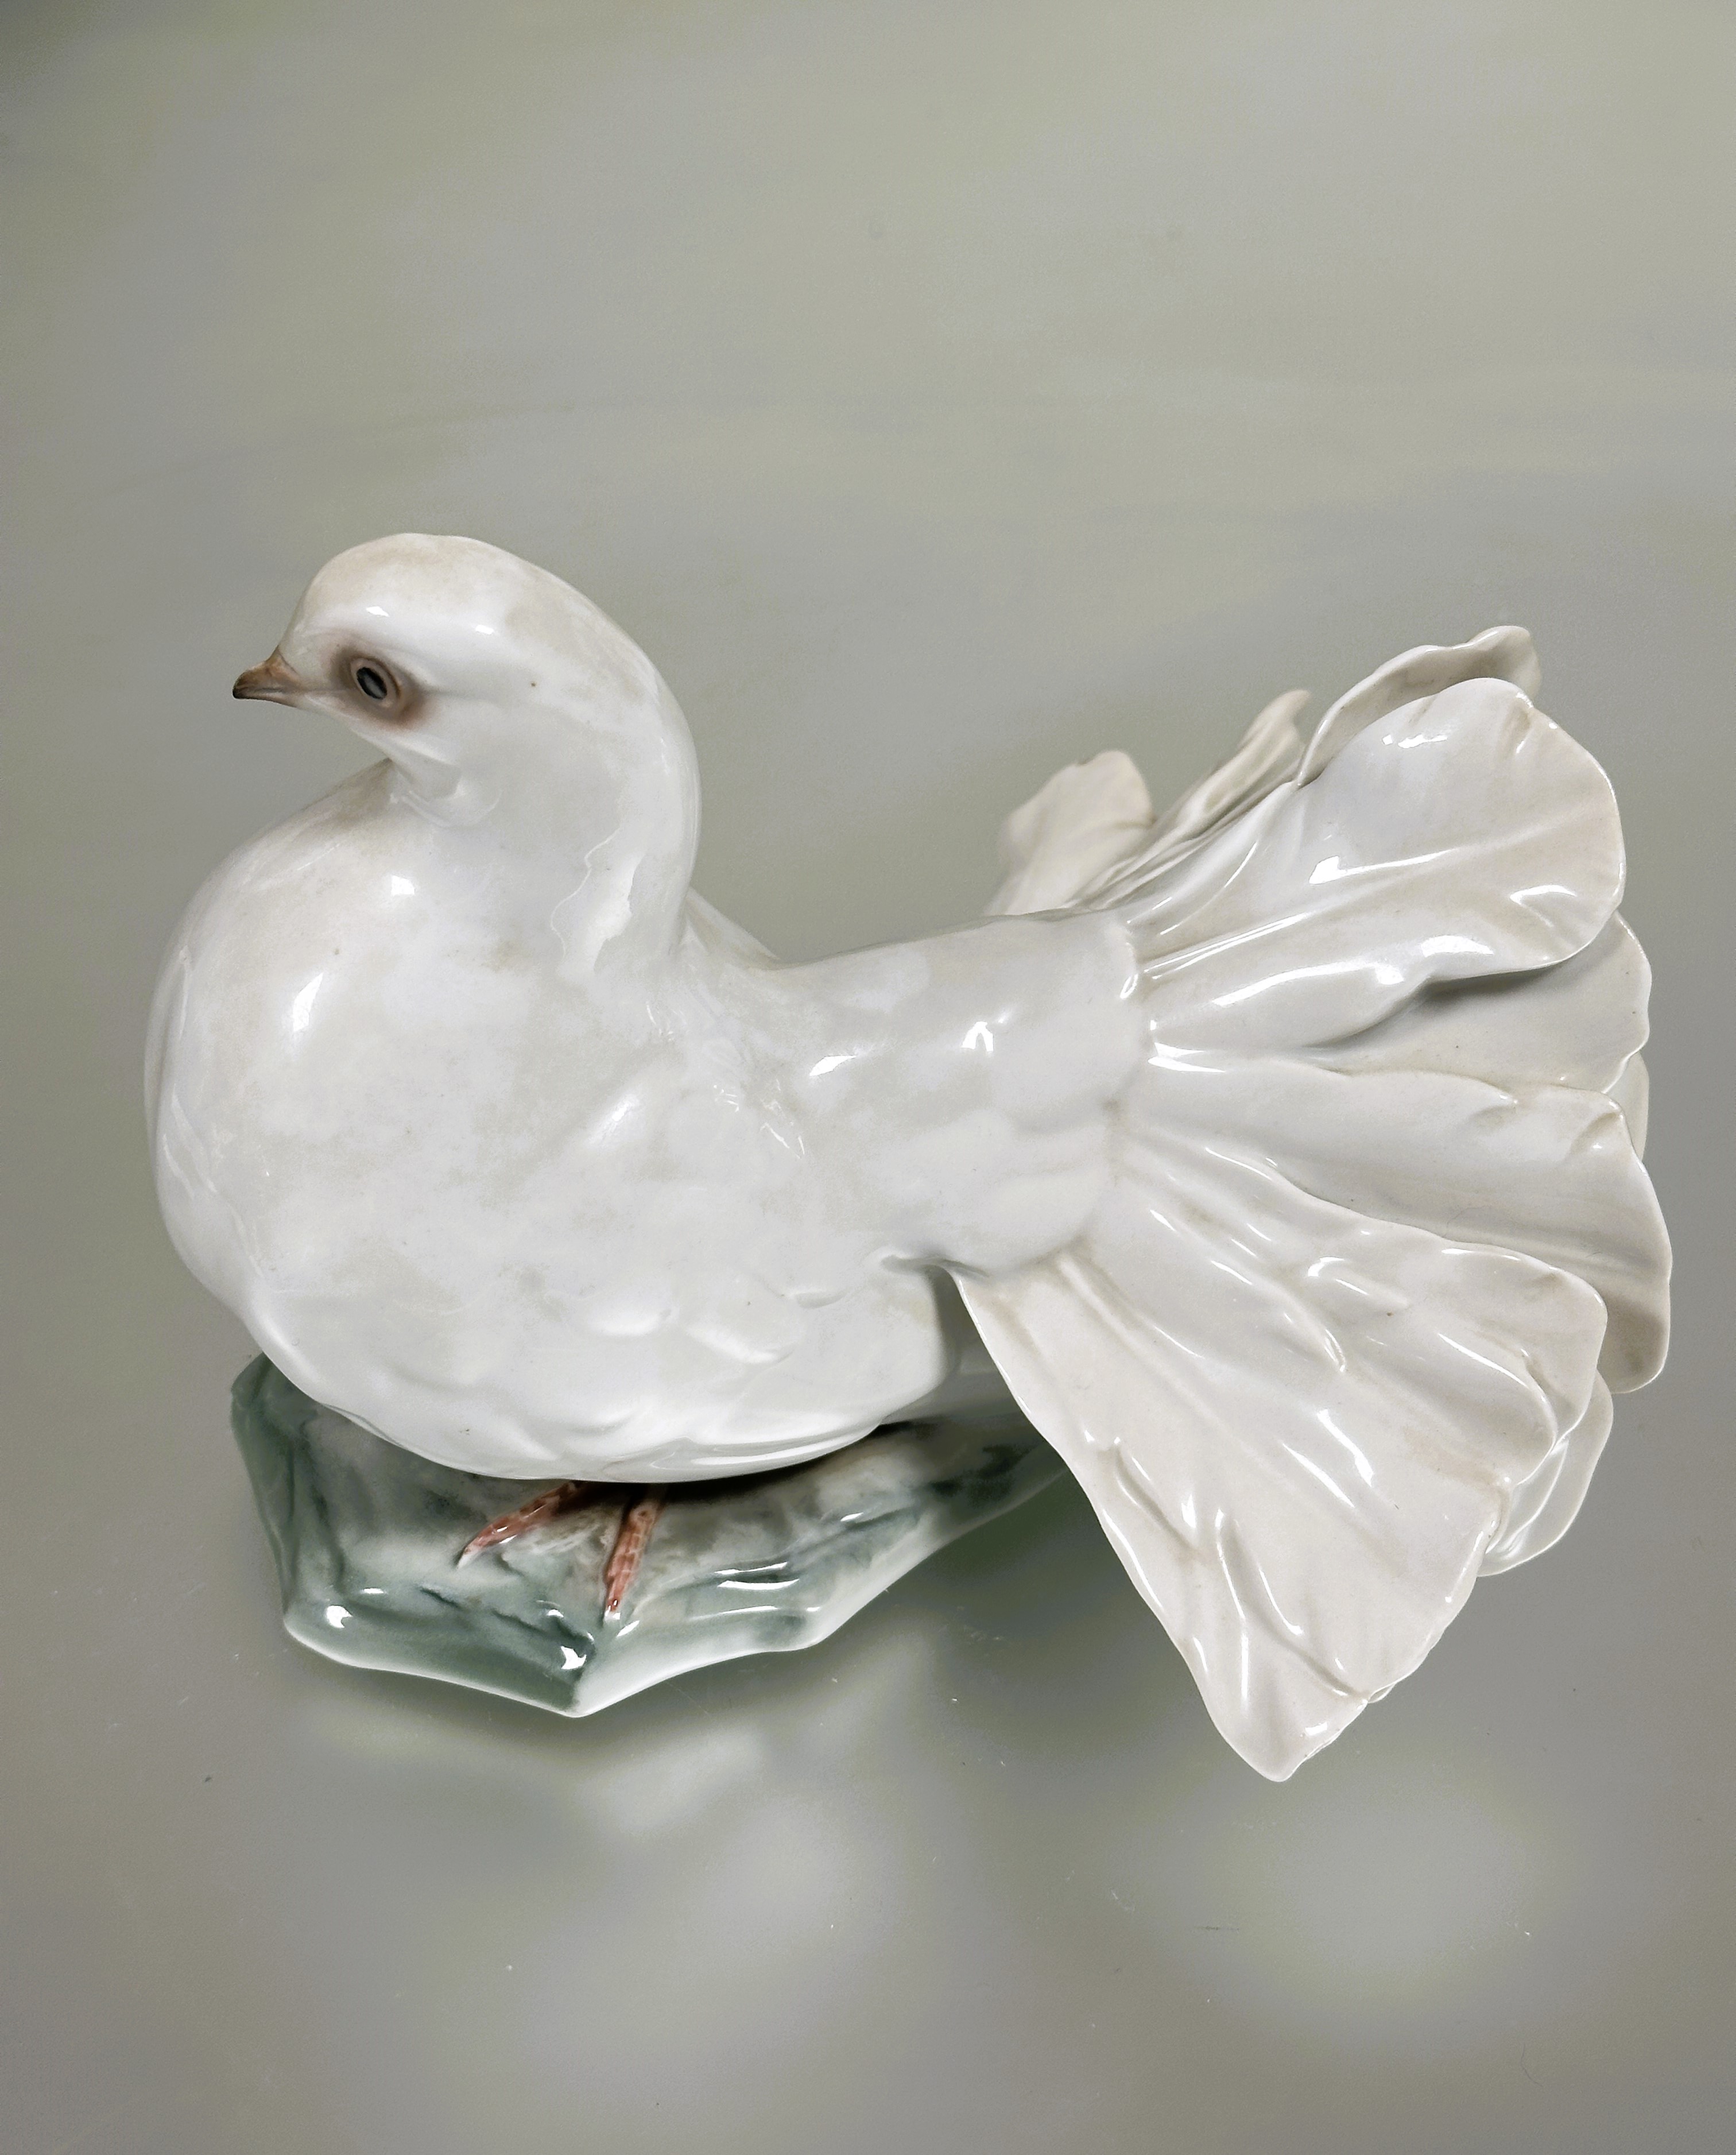 A German Rosenthal porcelain fantail dove figure decorated with polychrome enamels on naturalistic - Image 2 of 5